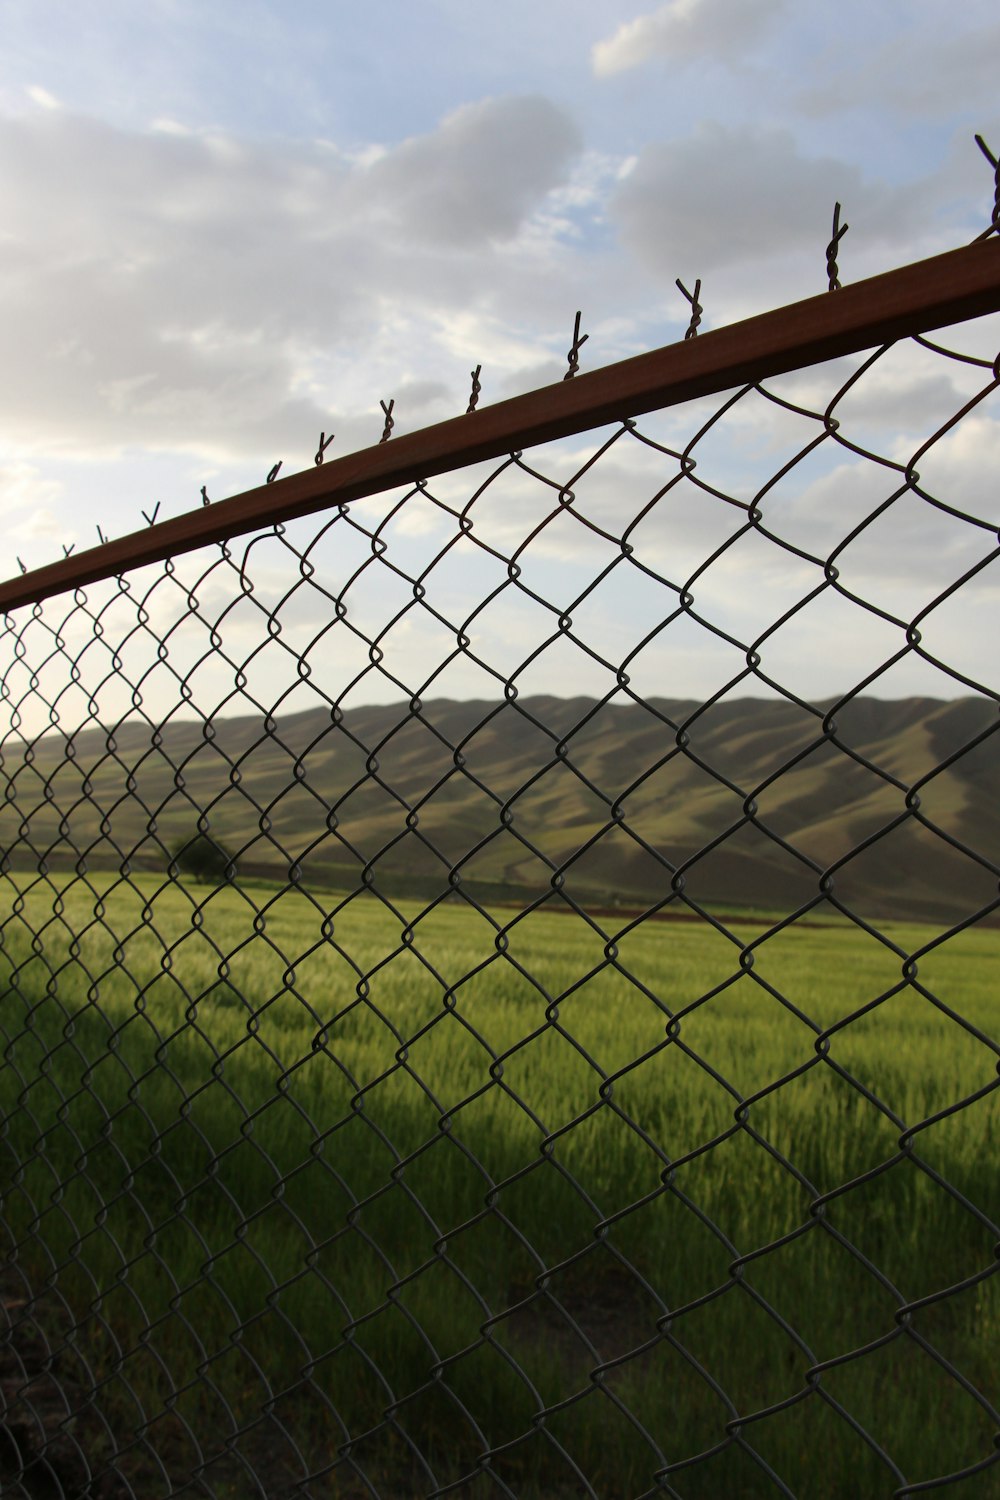 grey metal fence near green grass field during daytime